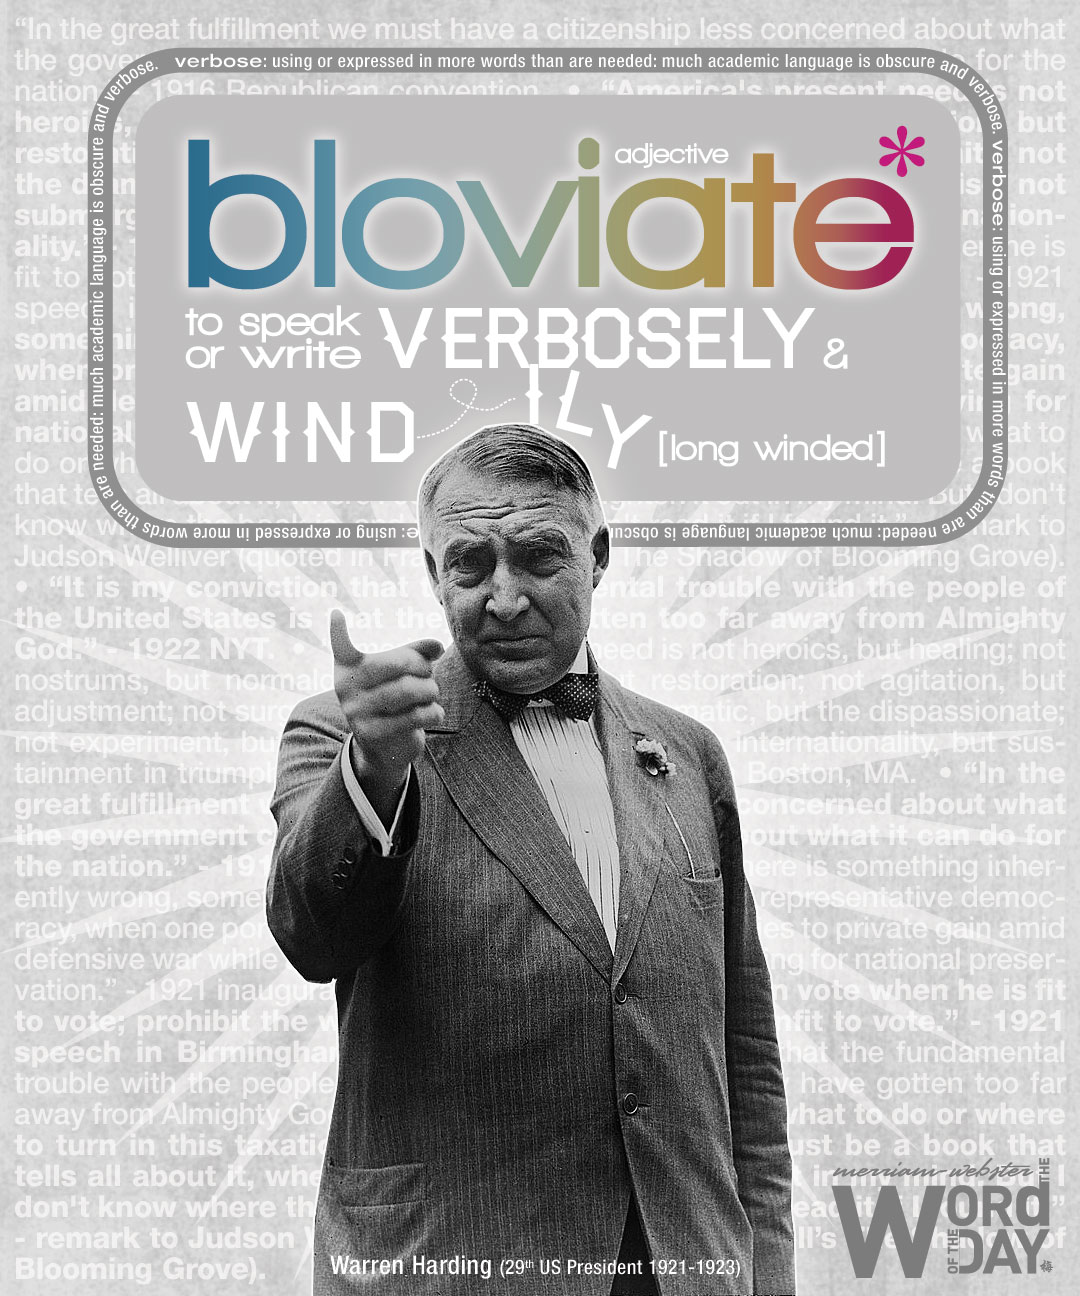 bloviate: to speak or write verbosely and windily